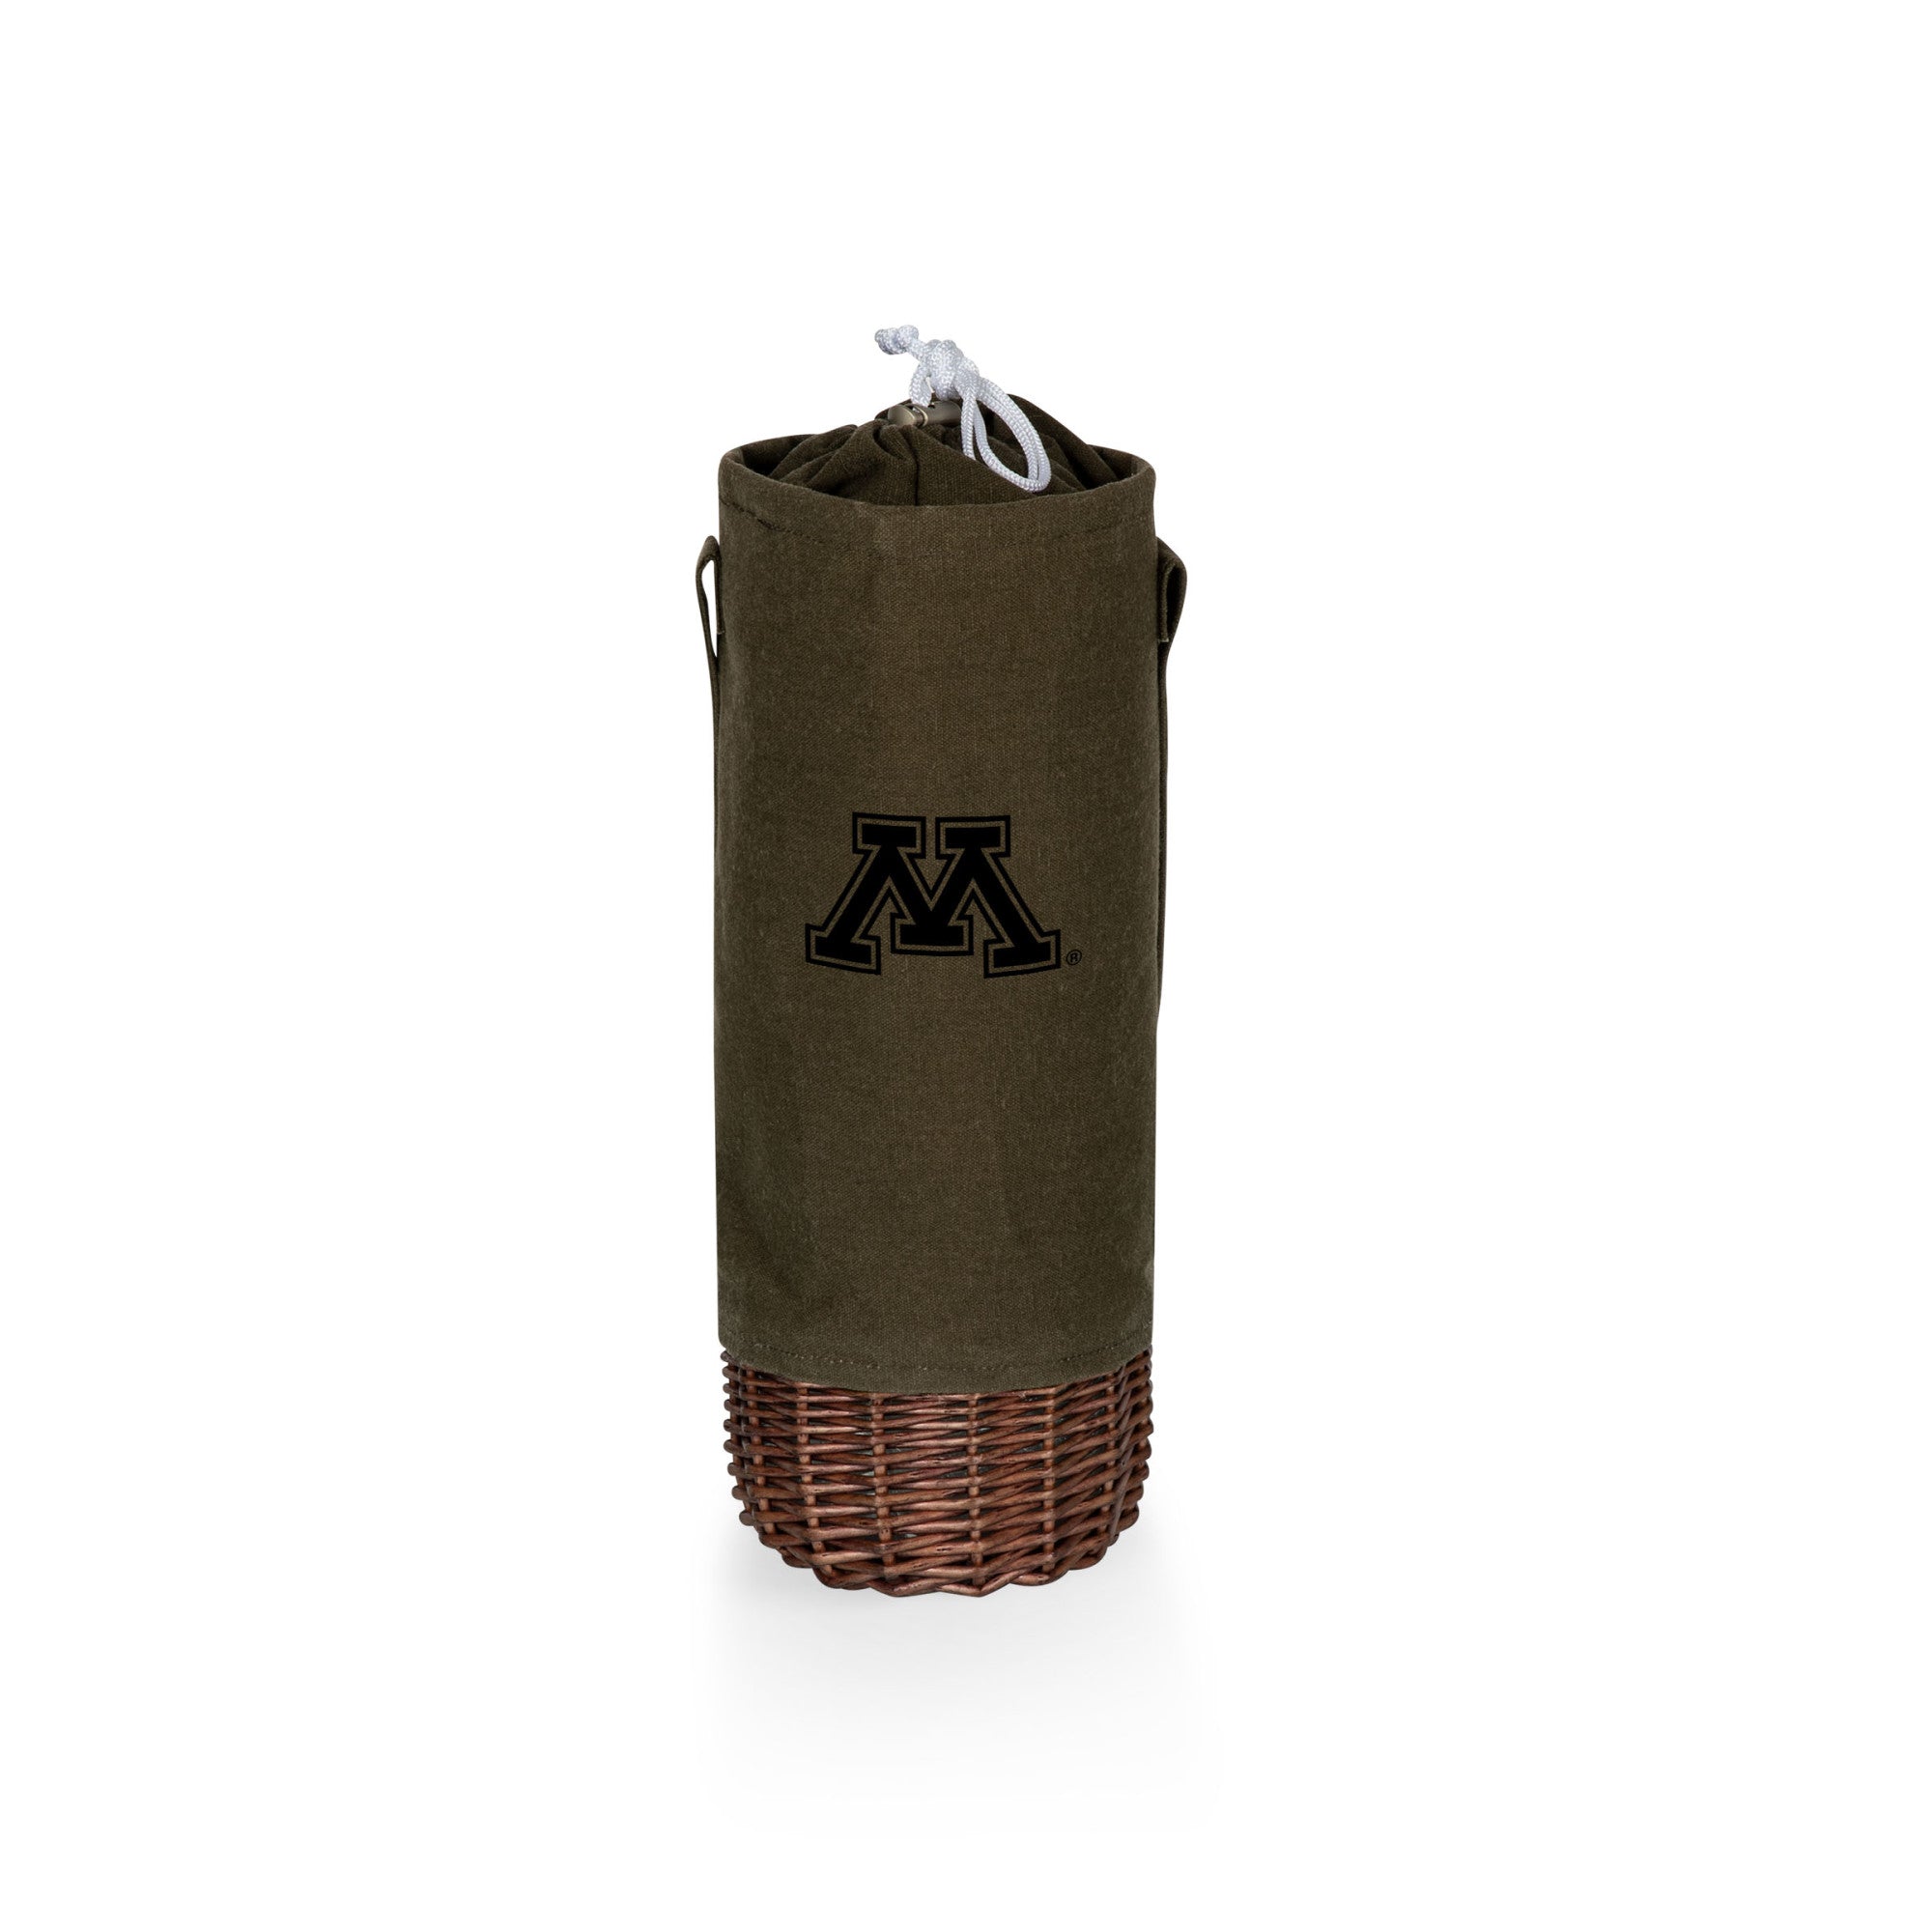 Minnesota Golden Gophers - Malbec Insulated Canvas and Willow Wine Bottle Basket